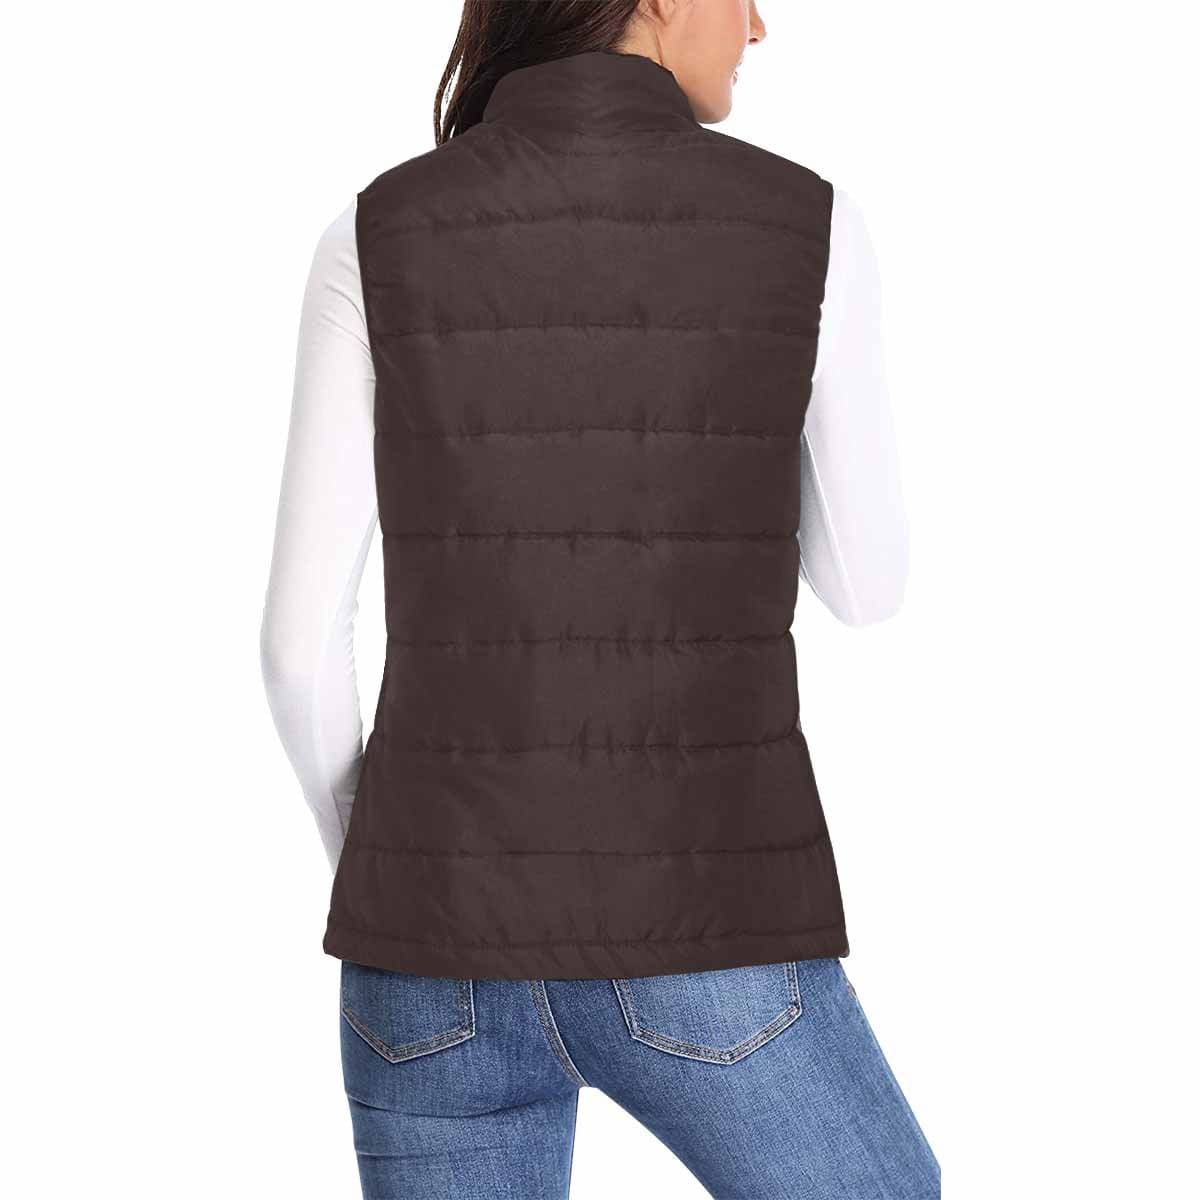 Women's Puffer Vest Jacket / Carafe Brown - KME means the very best